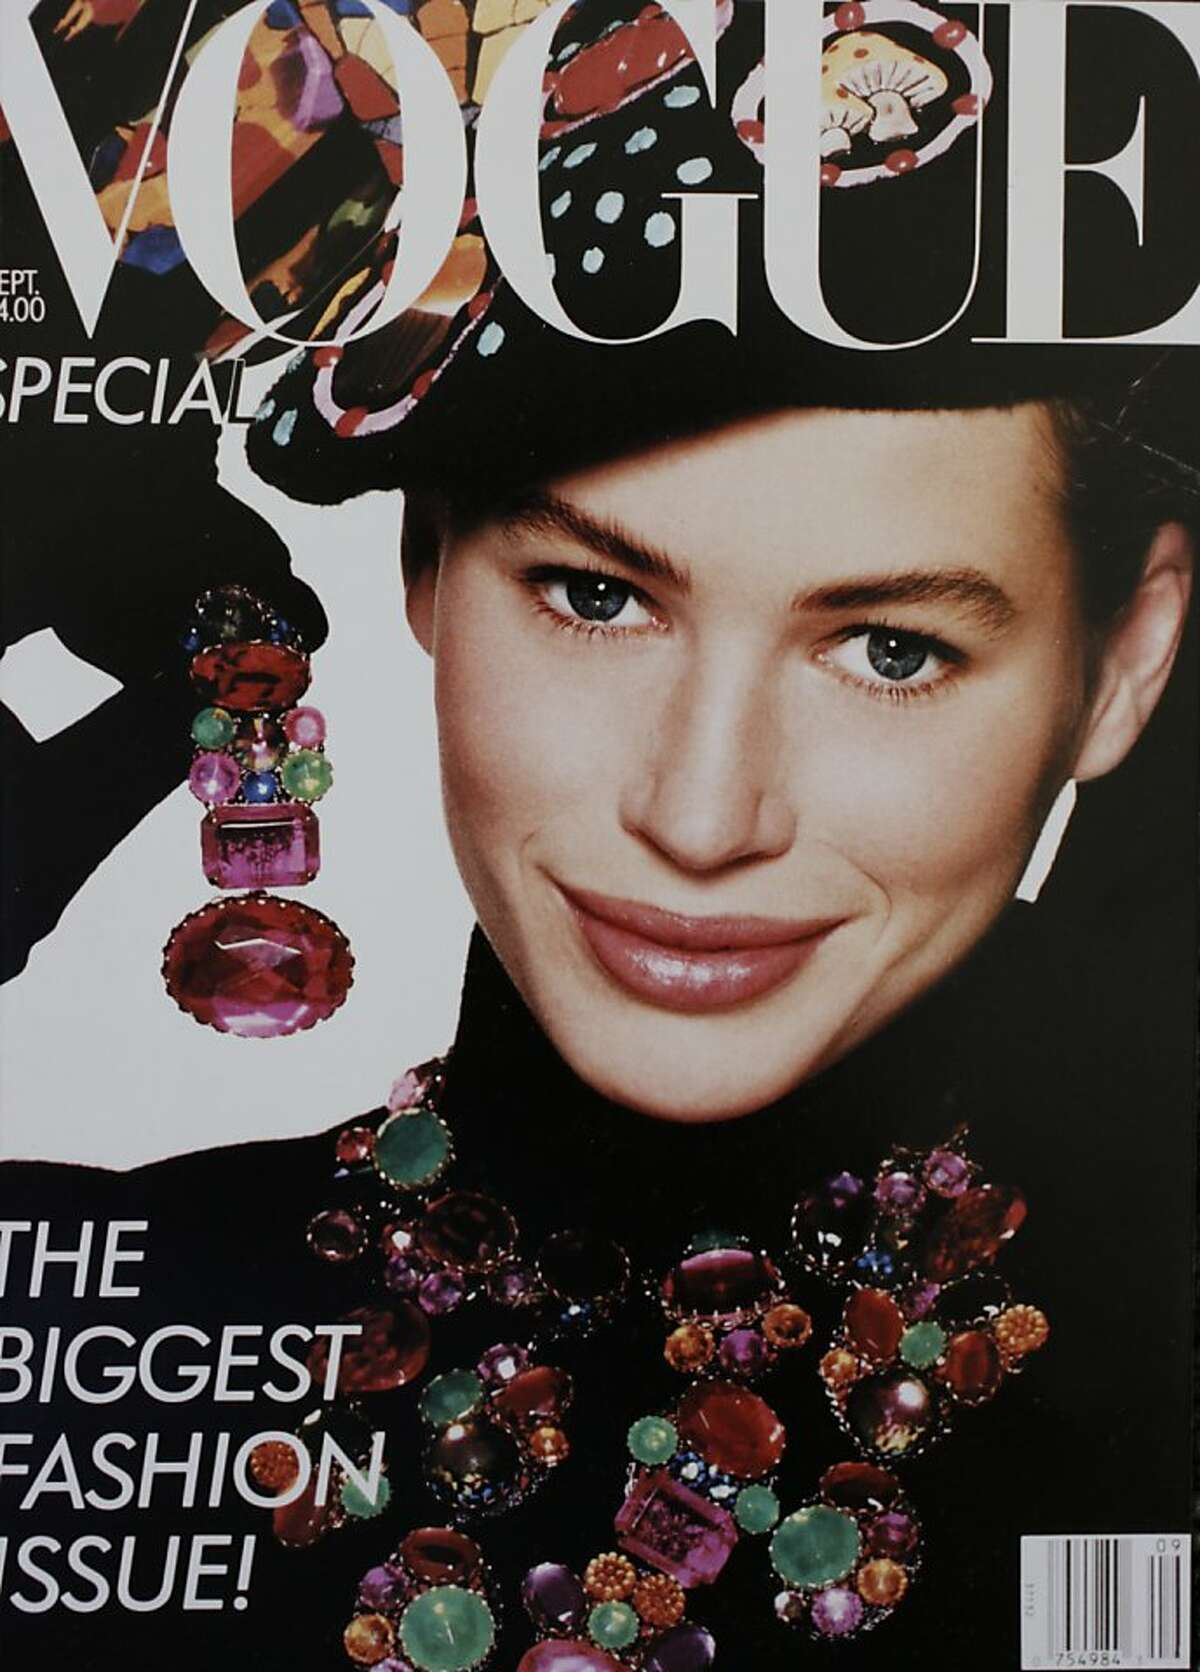 Supermodel Carrie Otis is seen early in her career on the cover of Vogue.